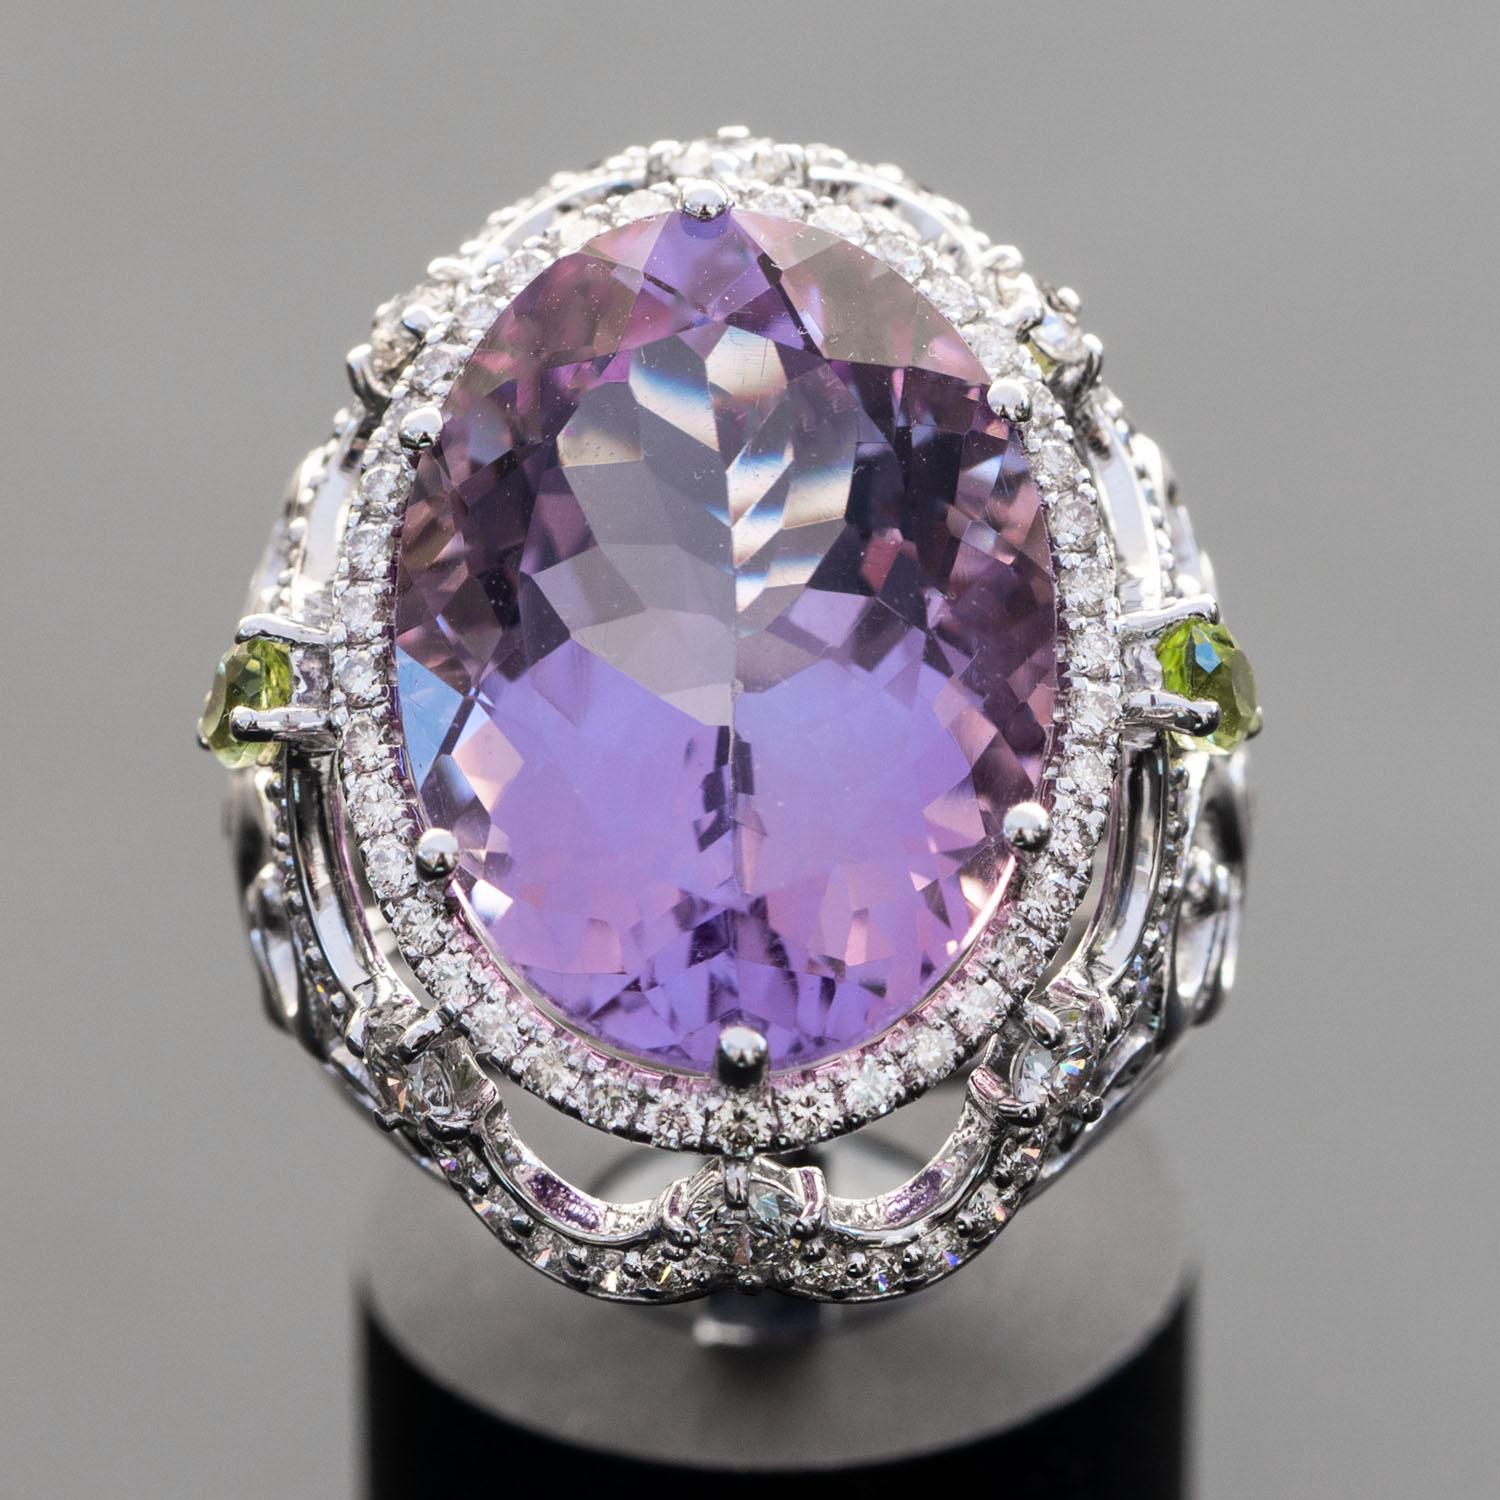 This design features 1.51 carat of VS white untreated natural diamonds, the perfect contrast to the translucent purple of this 16.00 carat natural Amethyst statement ring. The smooth white gold band offers a beautifully balanced texture to this